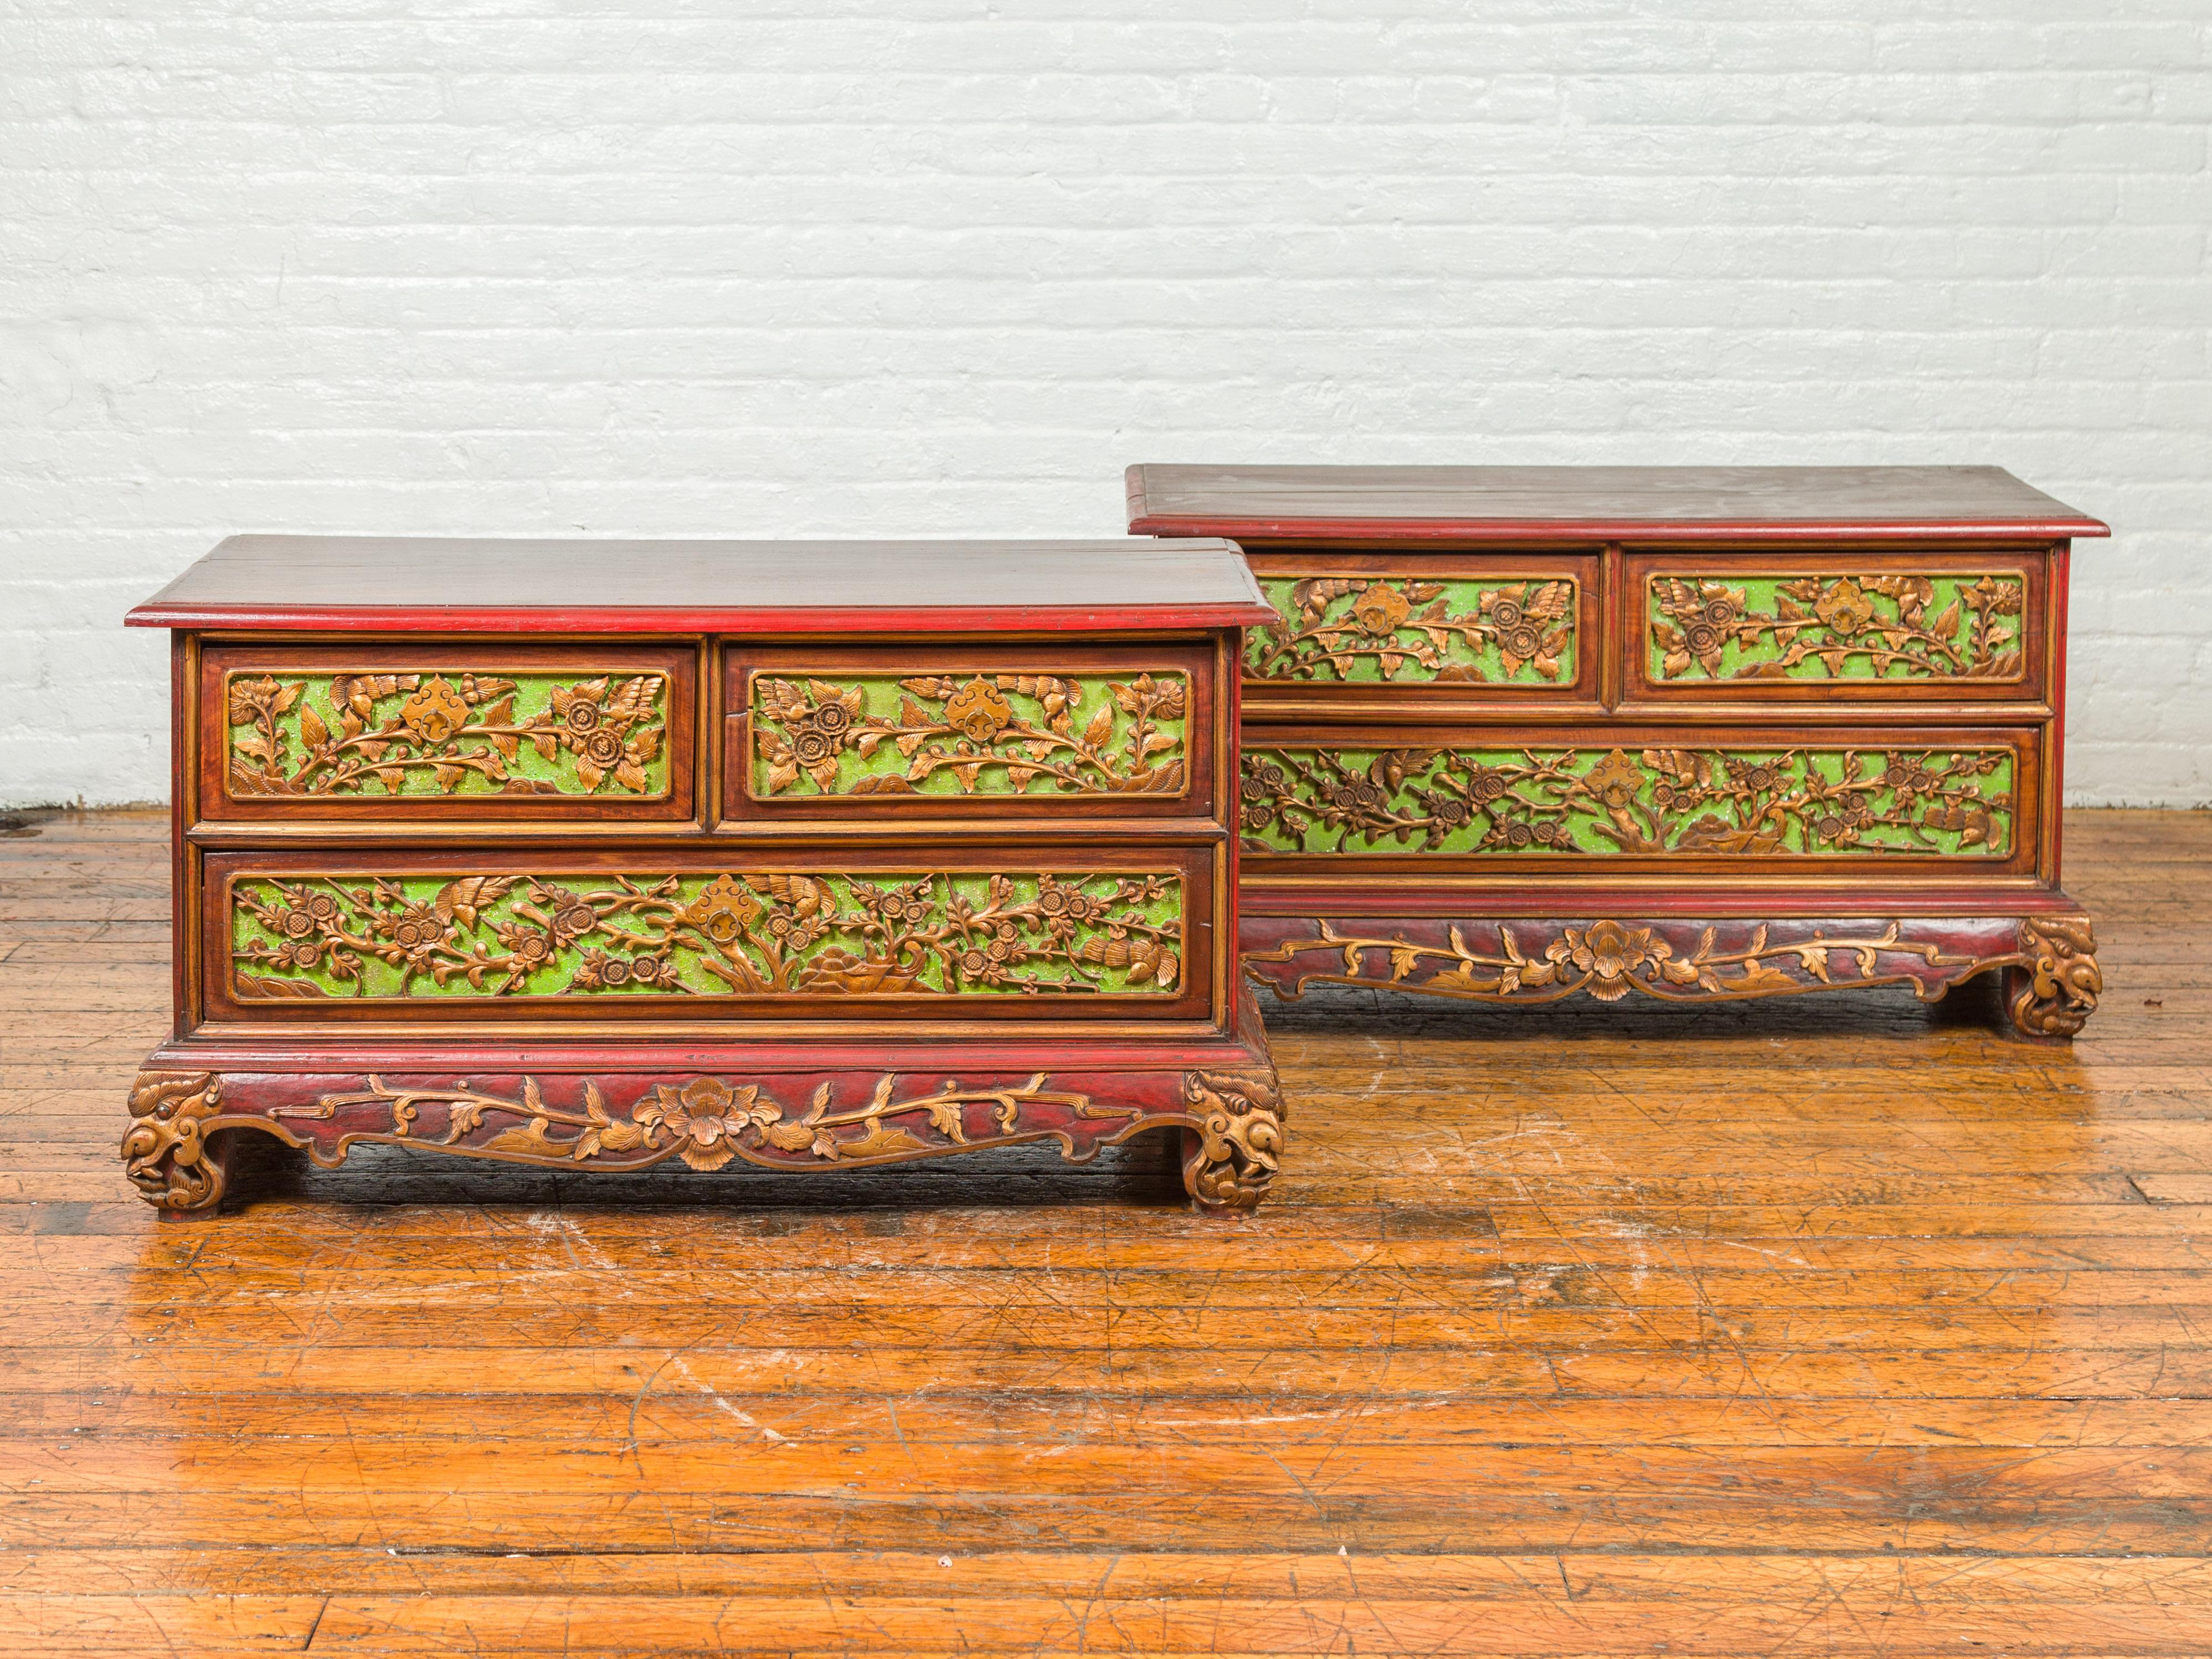 19th Century Polychrome Three-Drawer Chest from Madura with Carved Floral Motifs In Good Condition For Sale In Yonkers, NY